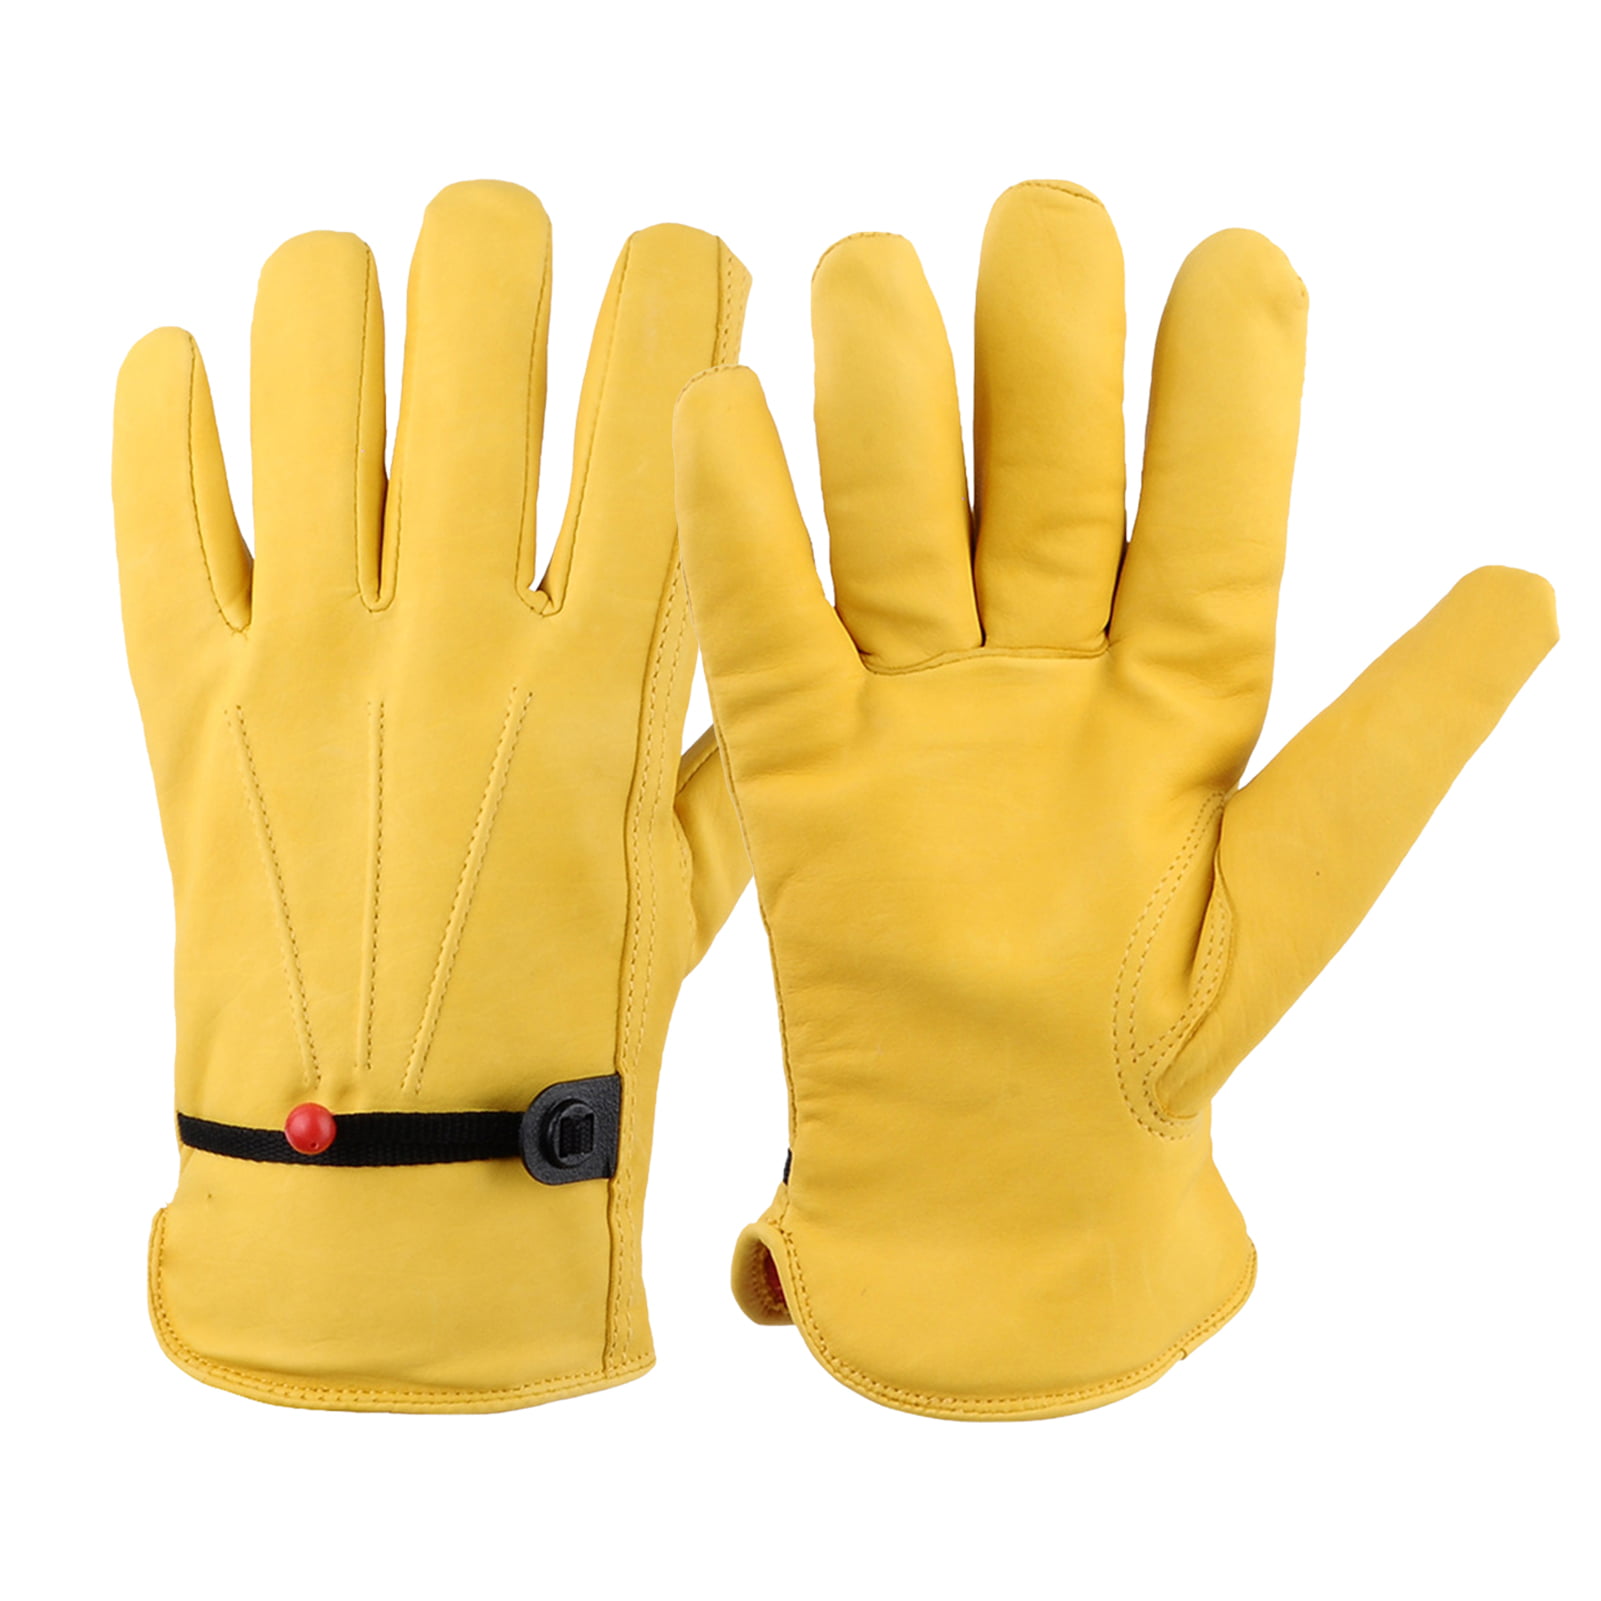 Details about   Oil Proof Cut Resistant Safety Work Waterproof Long Sleeve Gloves 1PAIR 